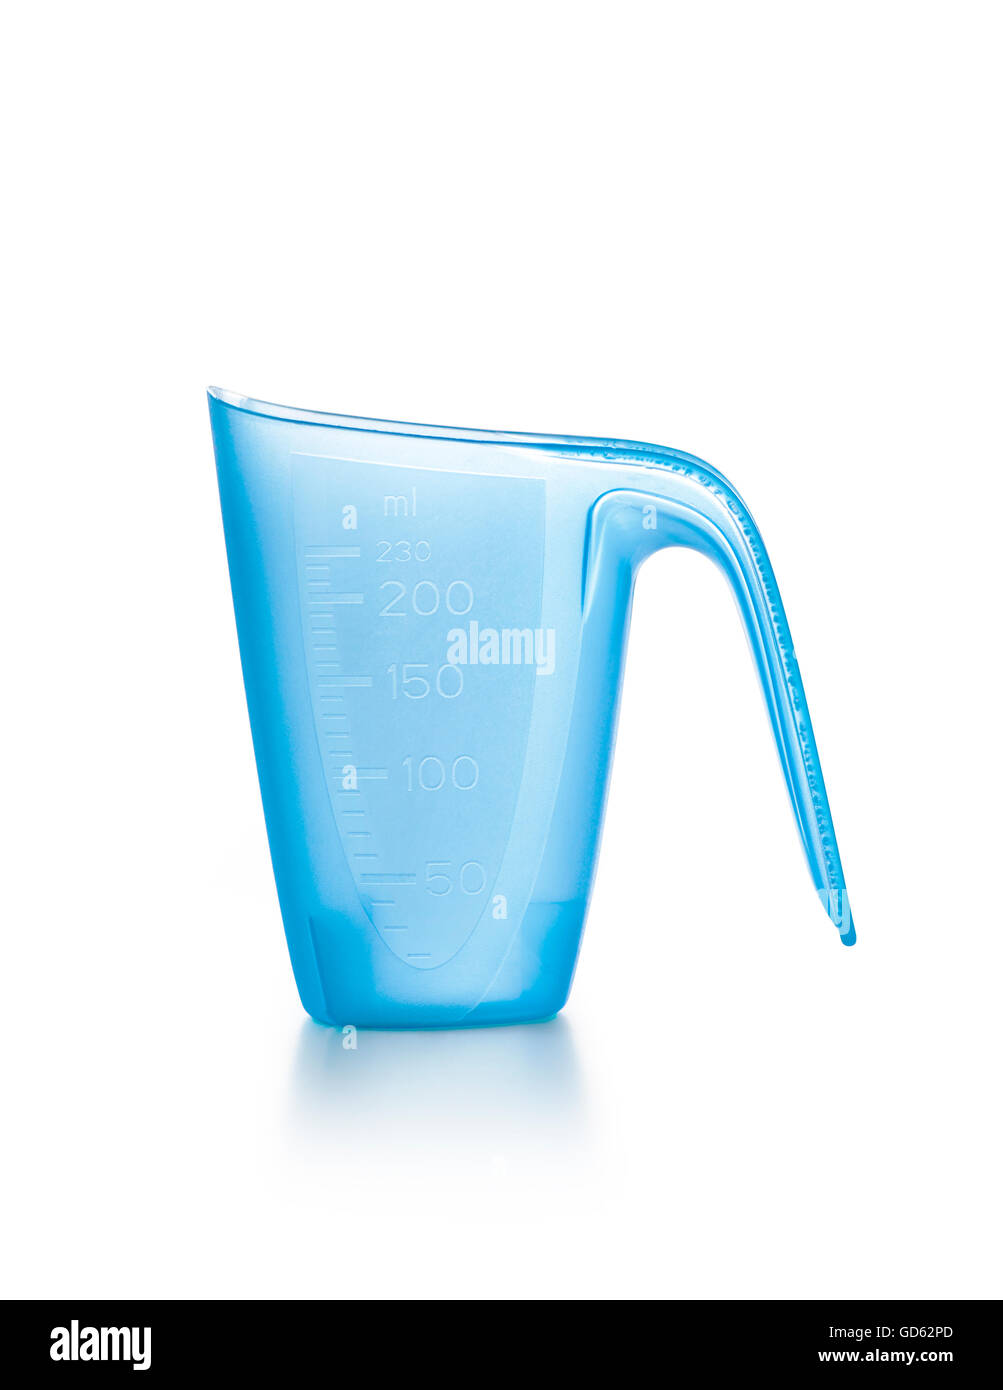 Laundry Detergent Or Washing Powder In A Blue Measuring Cup On A